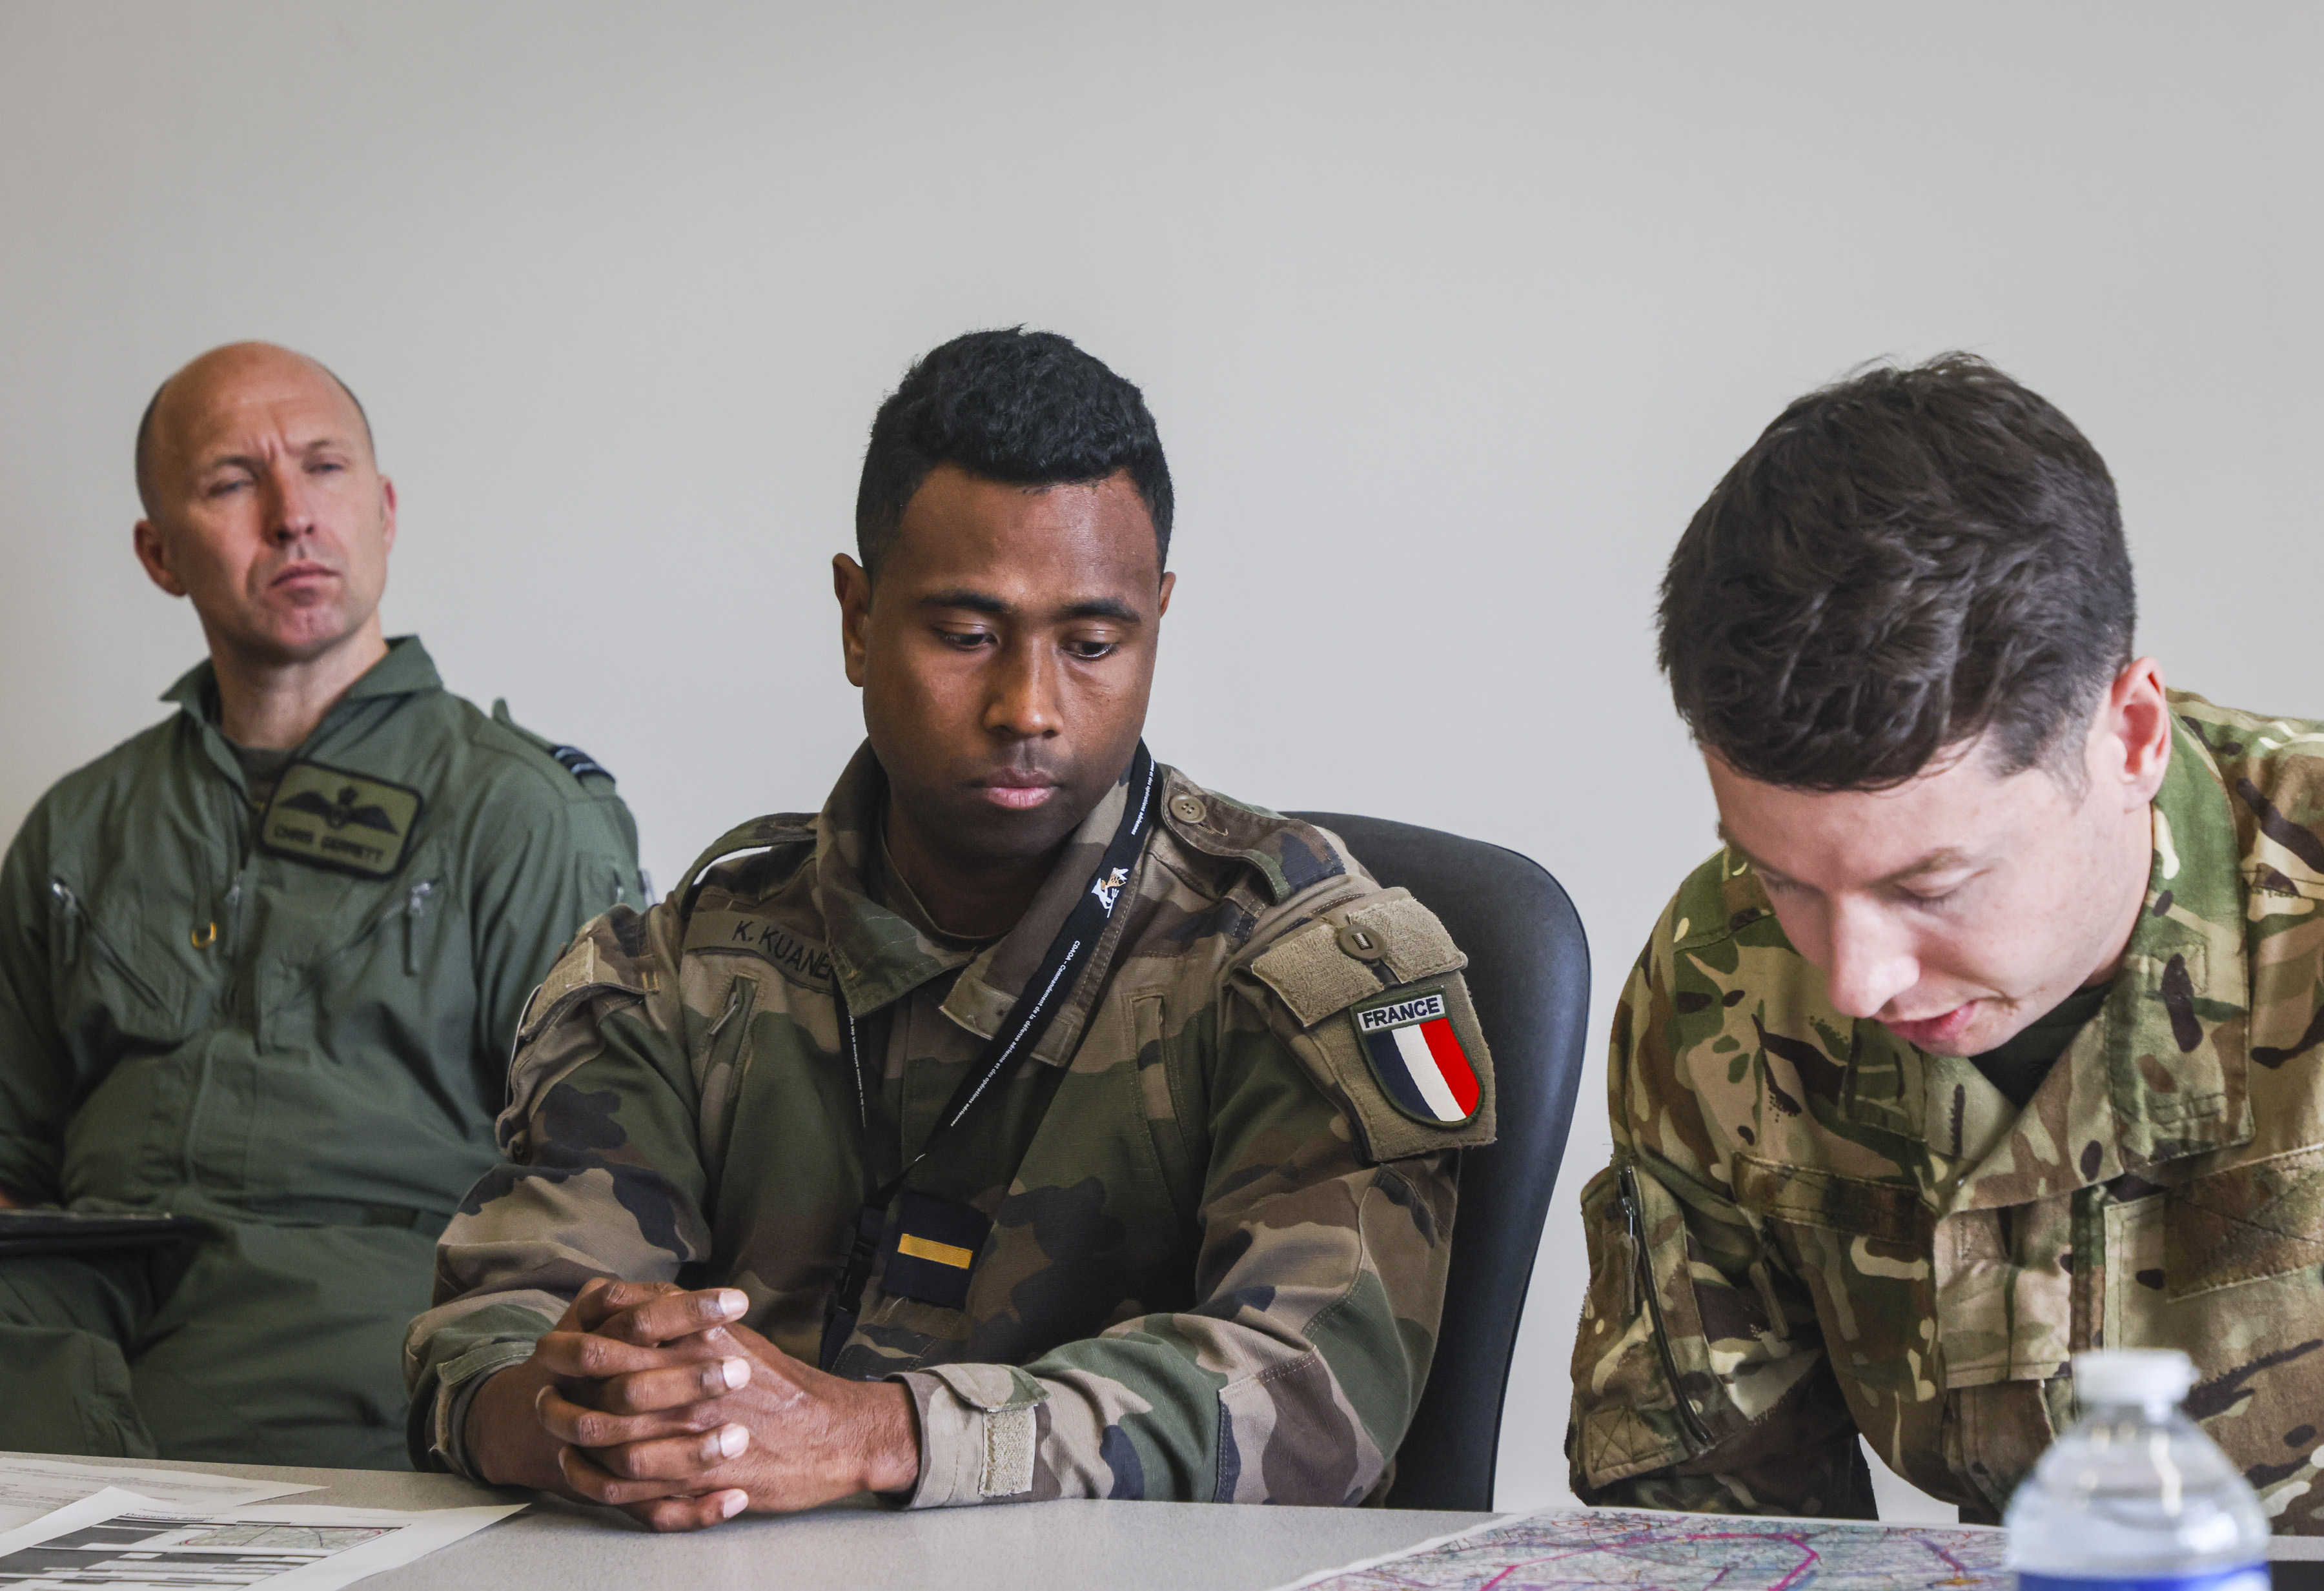 Working with French Air Force personnel, looking at papers on a table